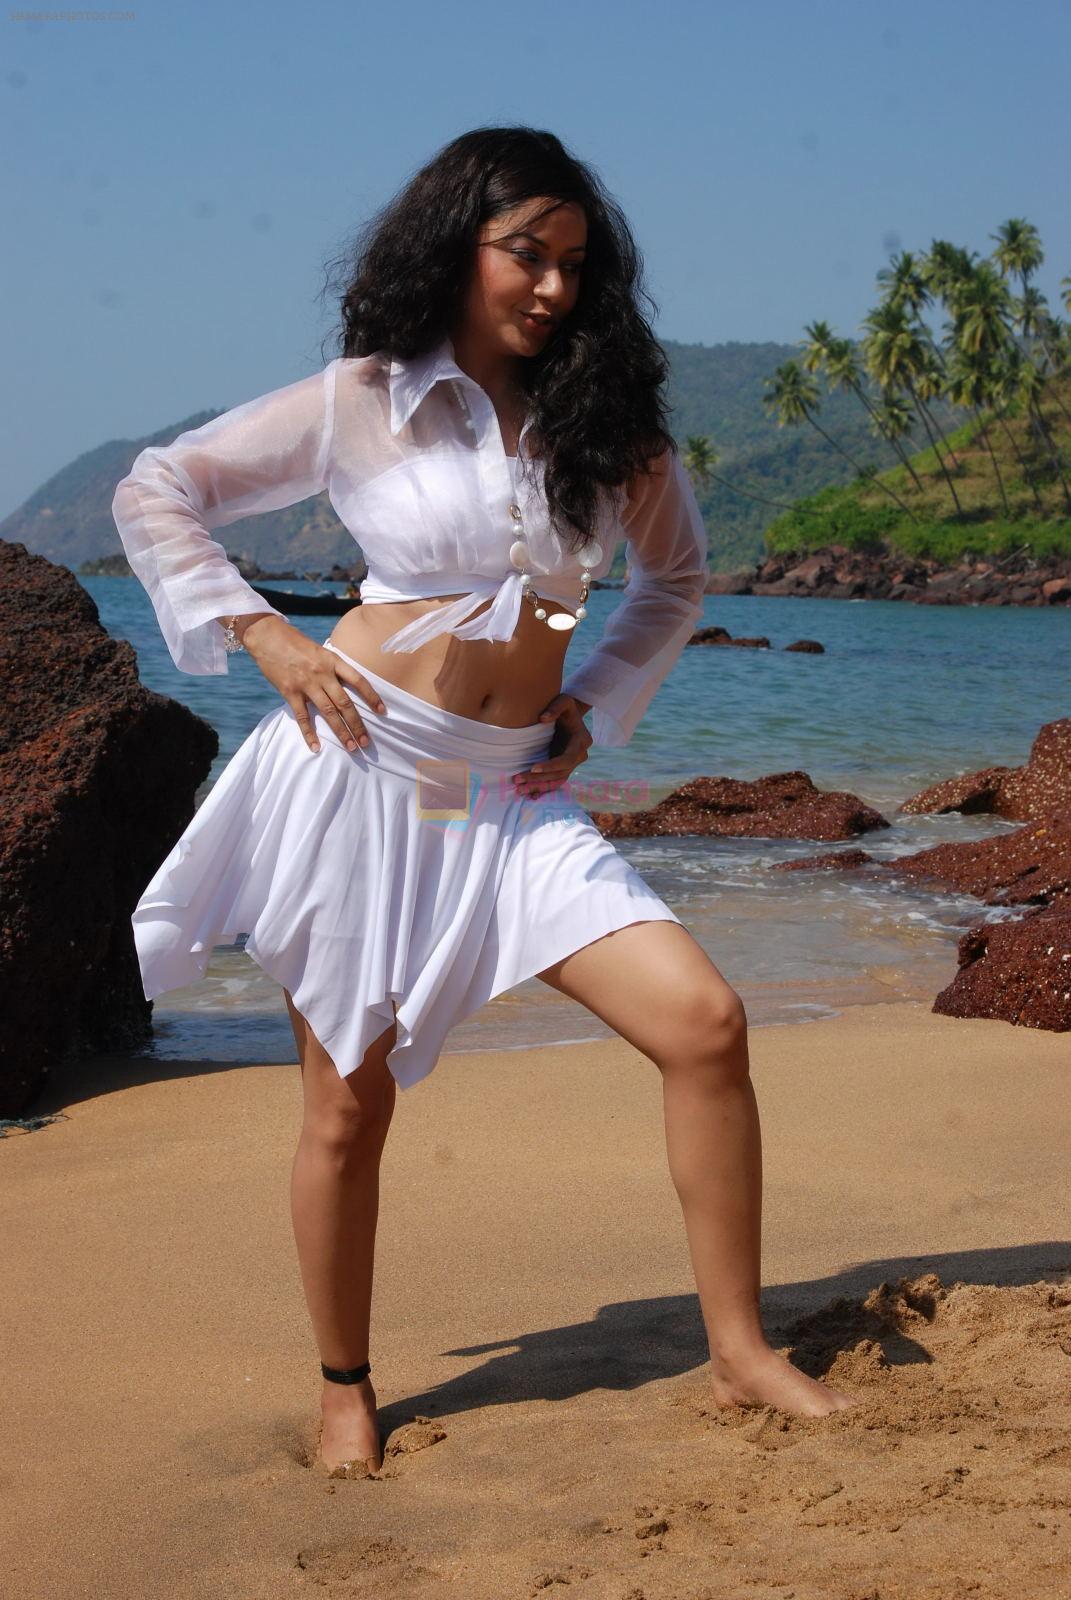 Anupoorva in Various Shoots